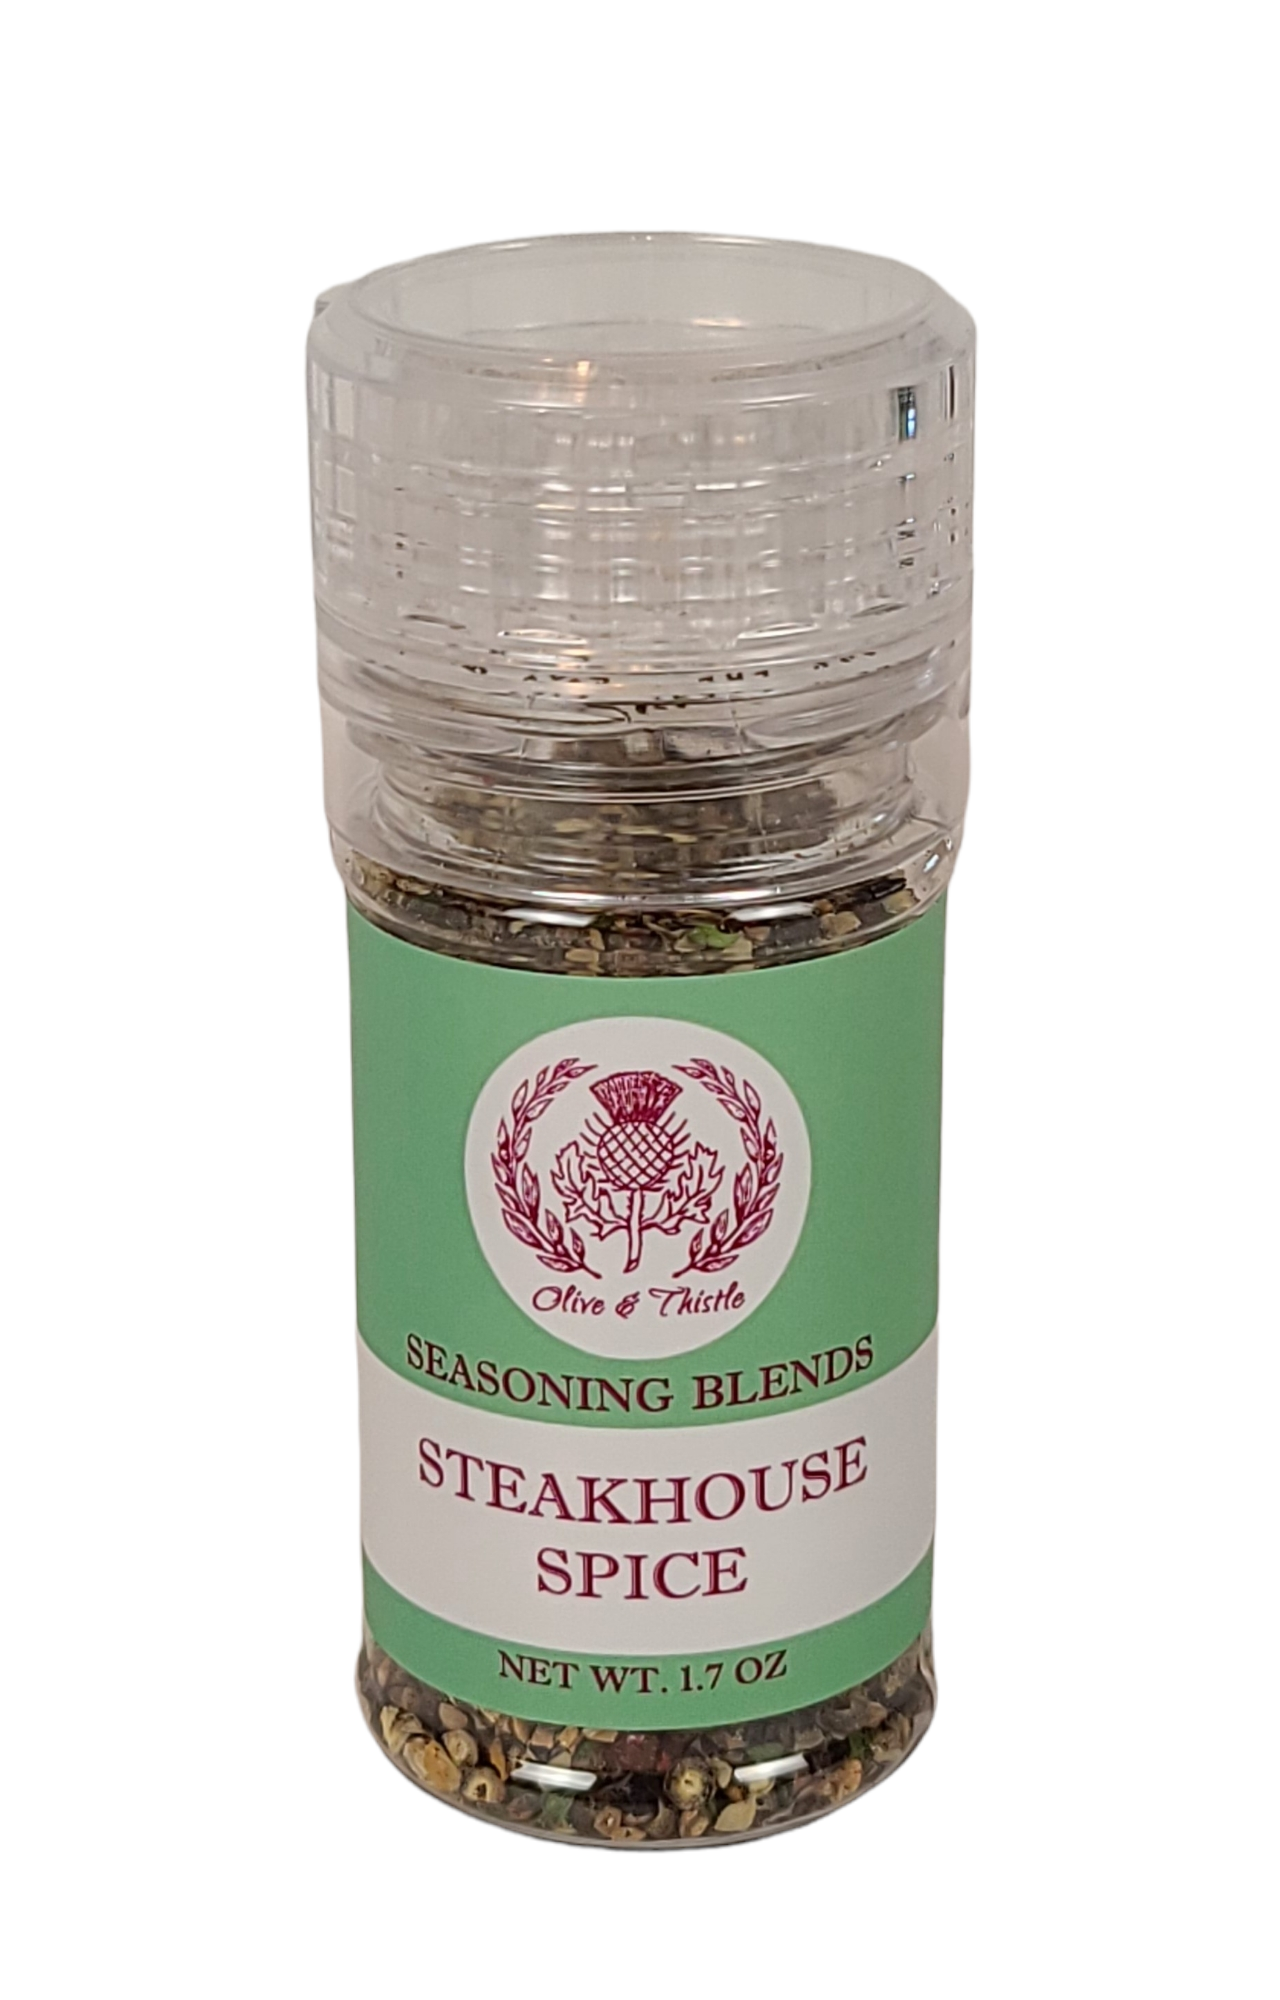 STEAKHOUSE SPICE